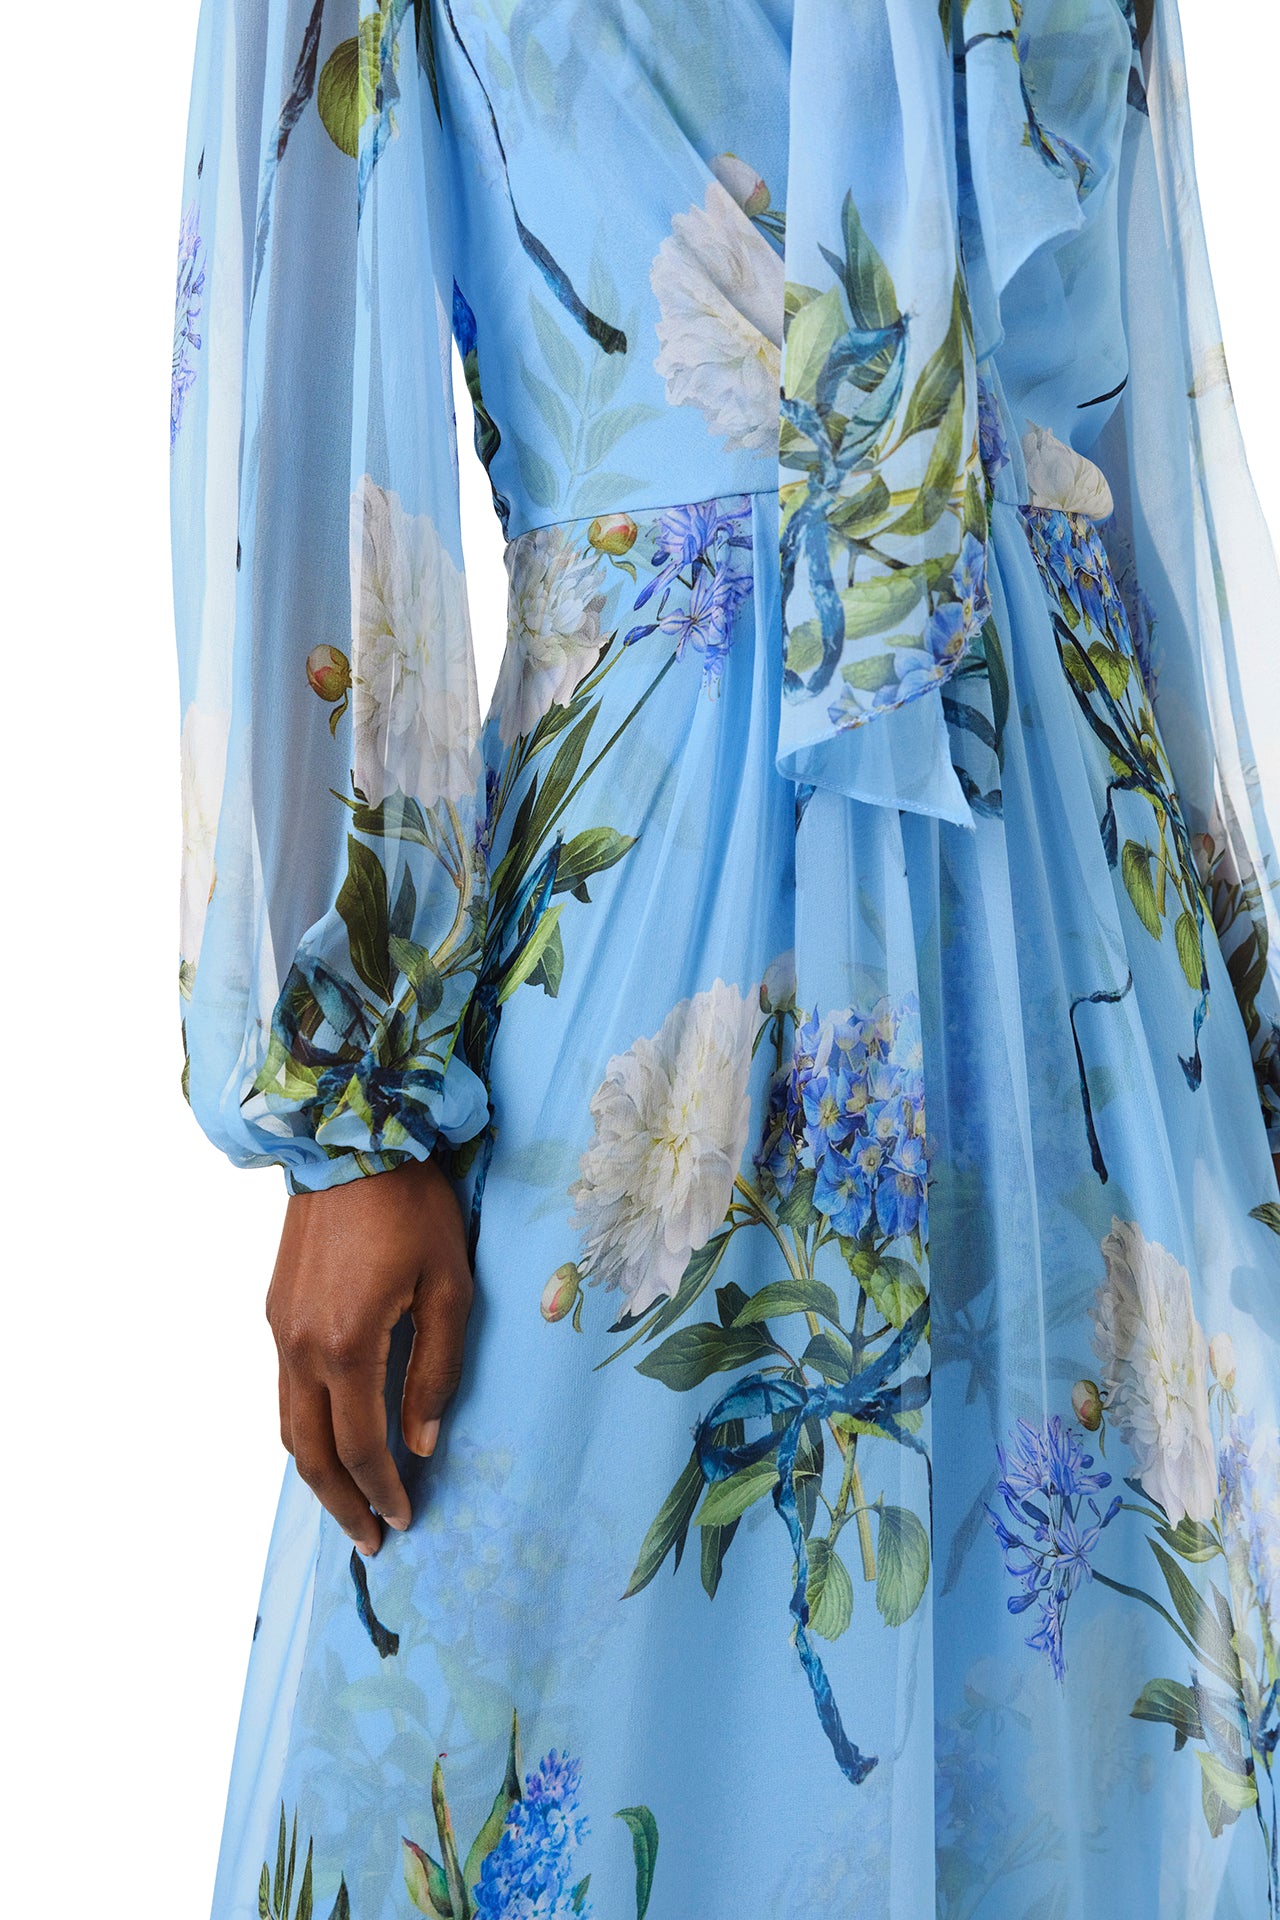 Monique Lhuillier Fall 2024 long sleeve gown in blue floral printed chiffon with self-tie neckline - detail.